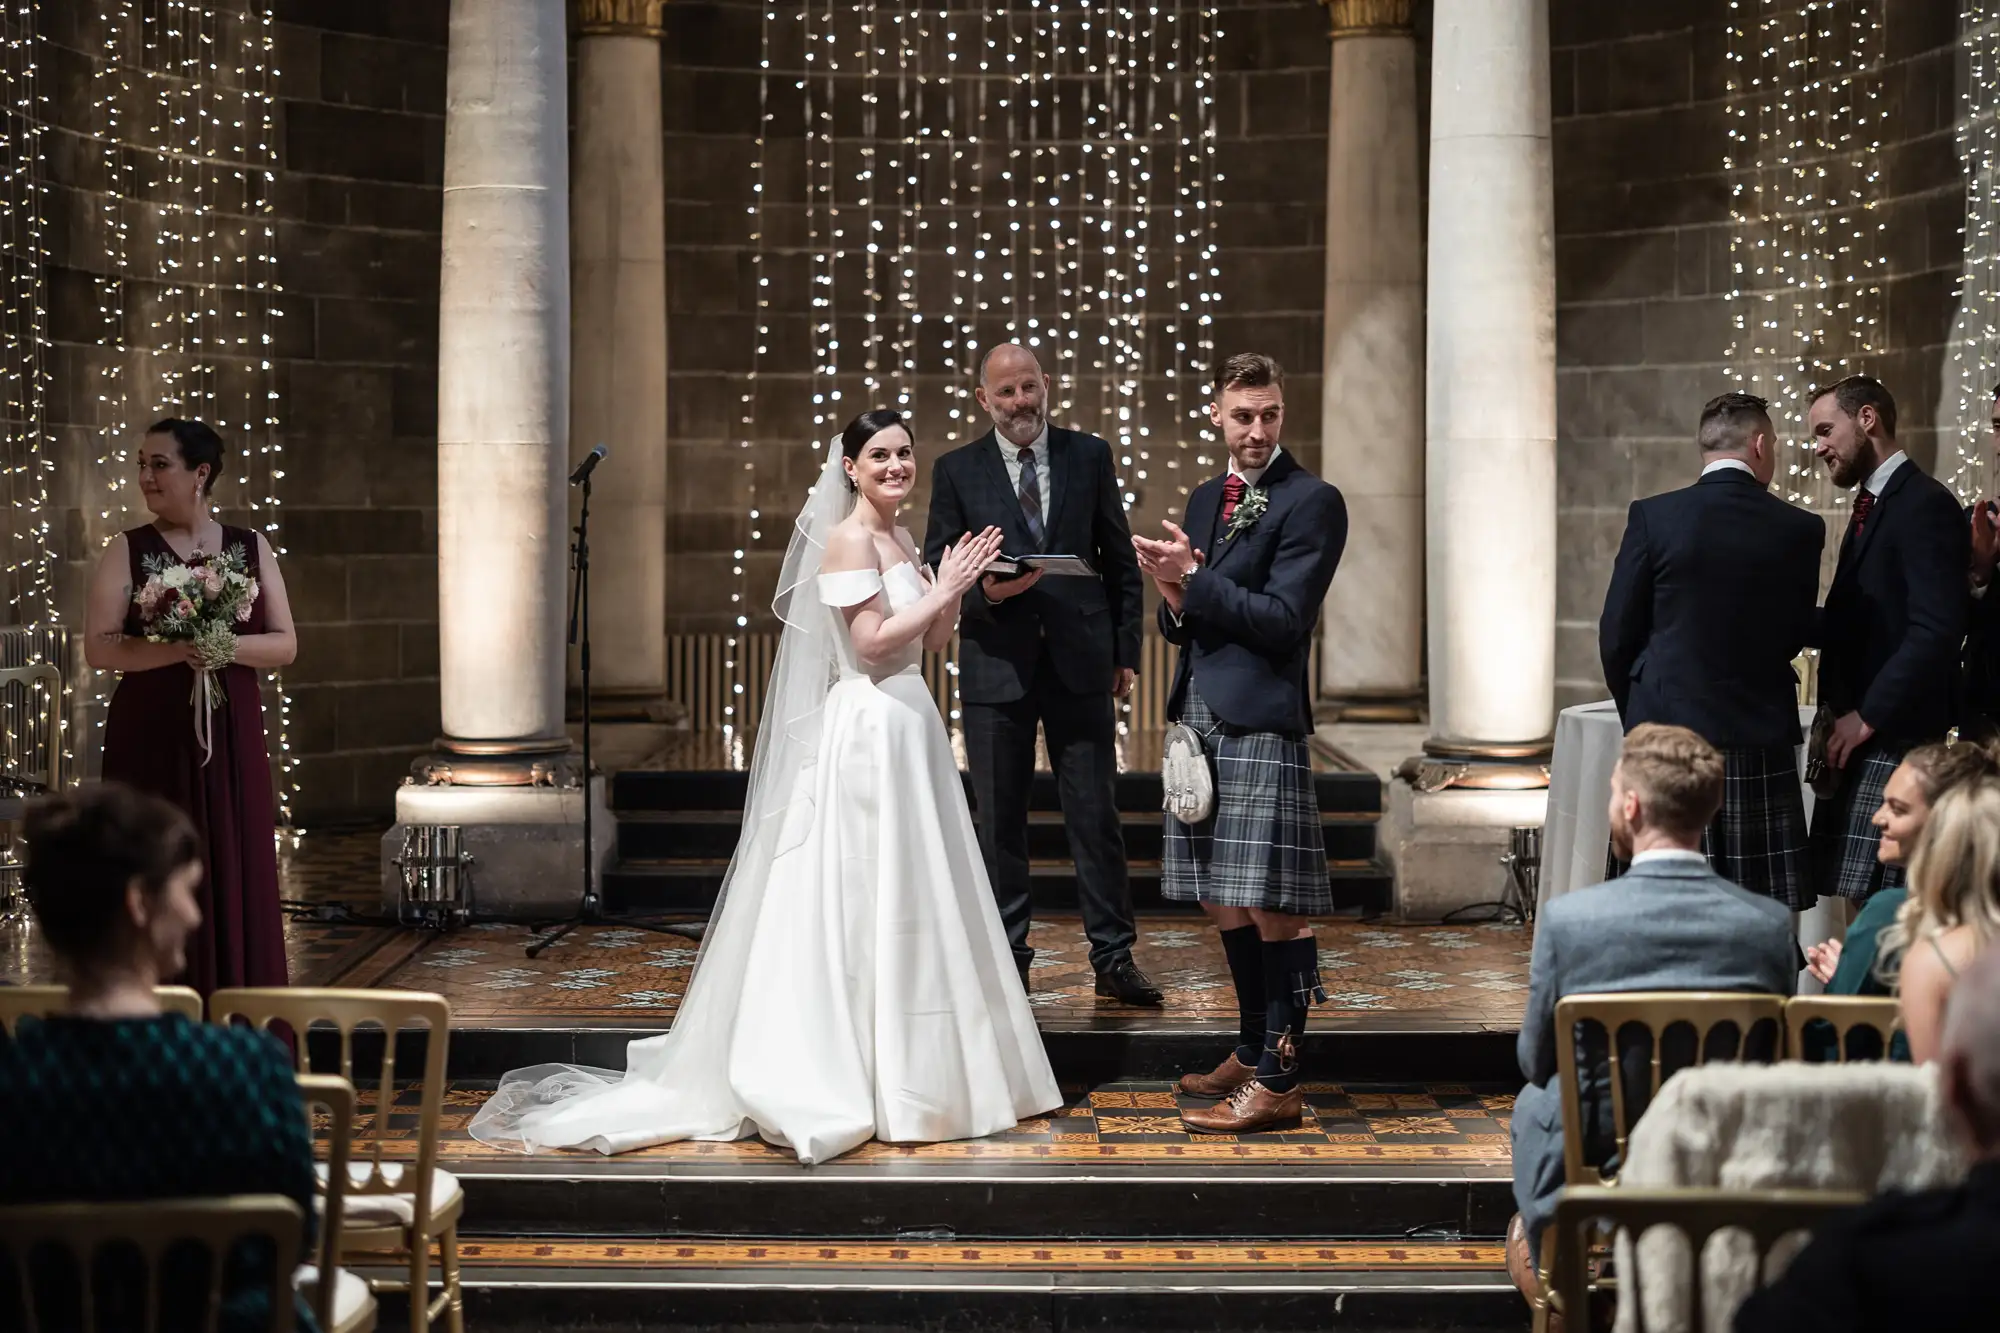 Bride and groom smiling at their wedding ceremony in a grand hall decorated with fairy lights, surrounded by guests and a man in a kilt clapping.